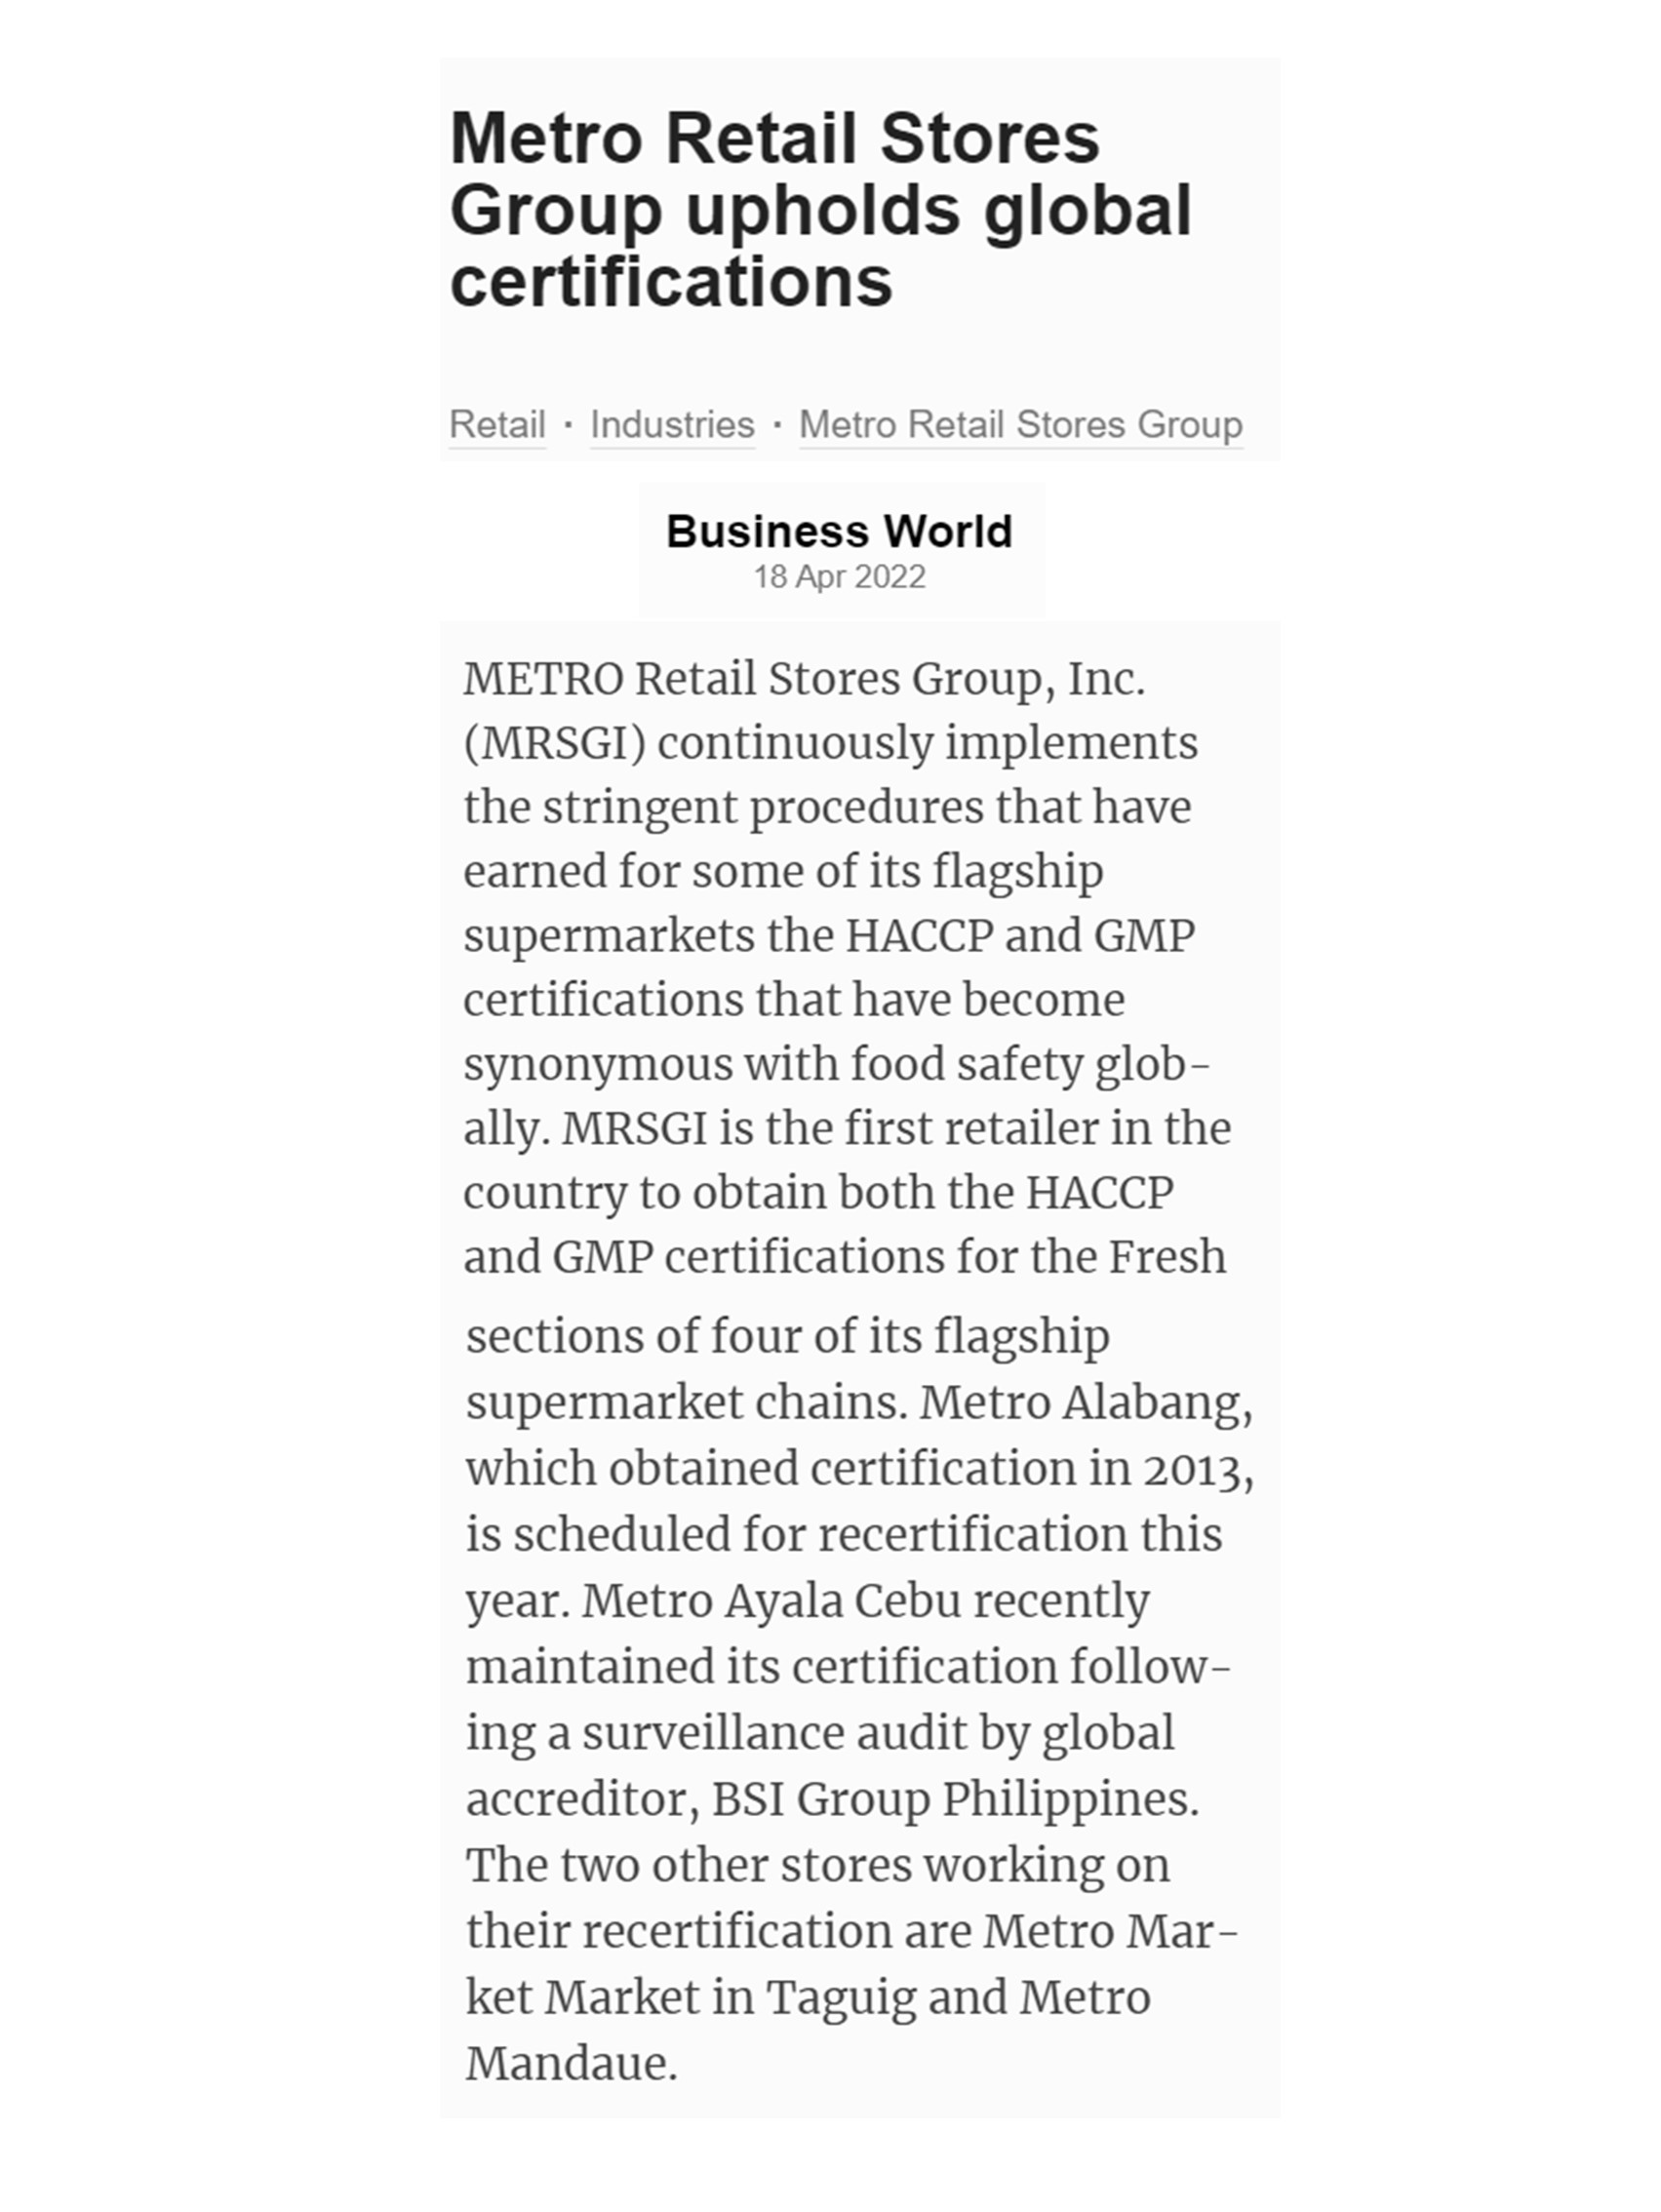 Metro Retail Stores Group upholds global certifications BusinessWorld